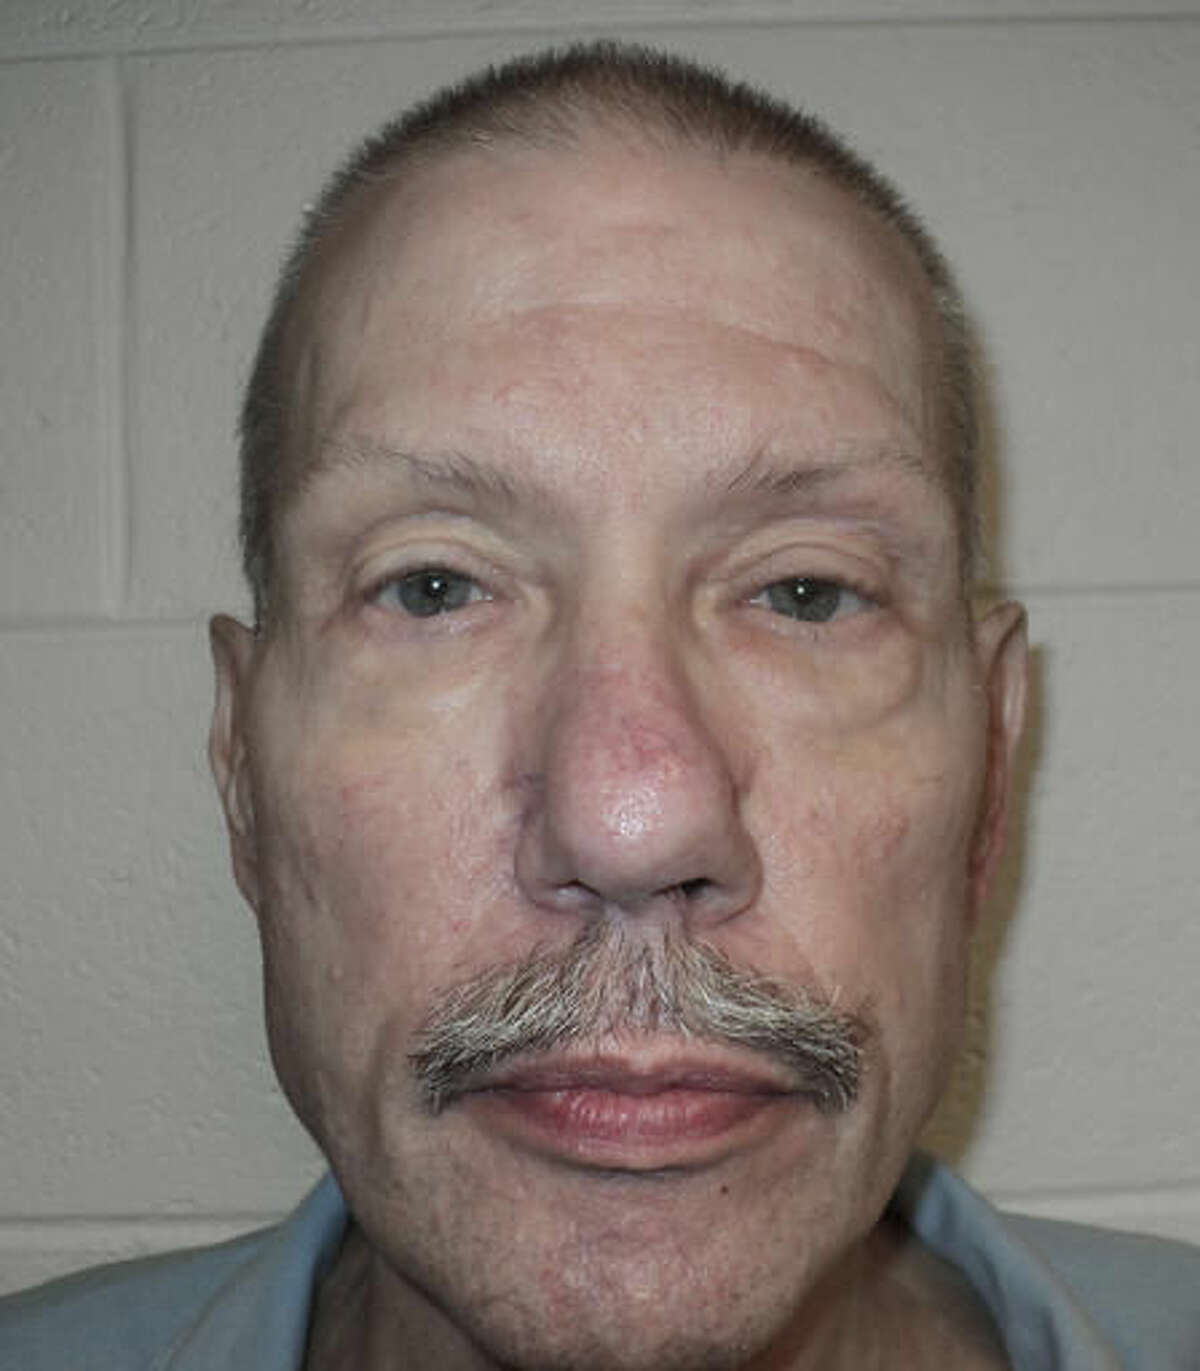 This April 30, 2013 photo provided by the Virginia Department of Corrections shows Keith Allen Haward, convicted in 1982 of rape and murder in Newport News and serving a life sentence. The Virginia Supreme Court granted Harward's petition for a writ of actual innocence on Thursday, April 7, 2016, and ordered the Department of Corrections to release him from custody. Recent DNA tests failed to identify Harward's genetic profile in sperm left at the crime scene. (Virginia Department of Corrections via AP)